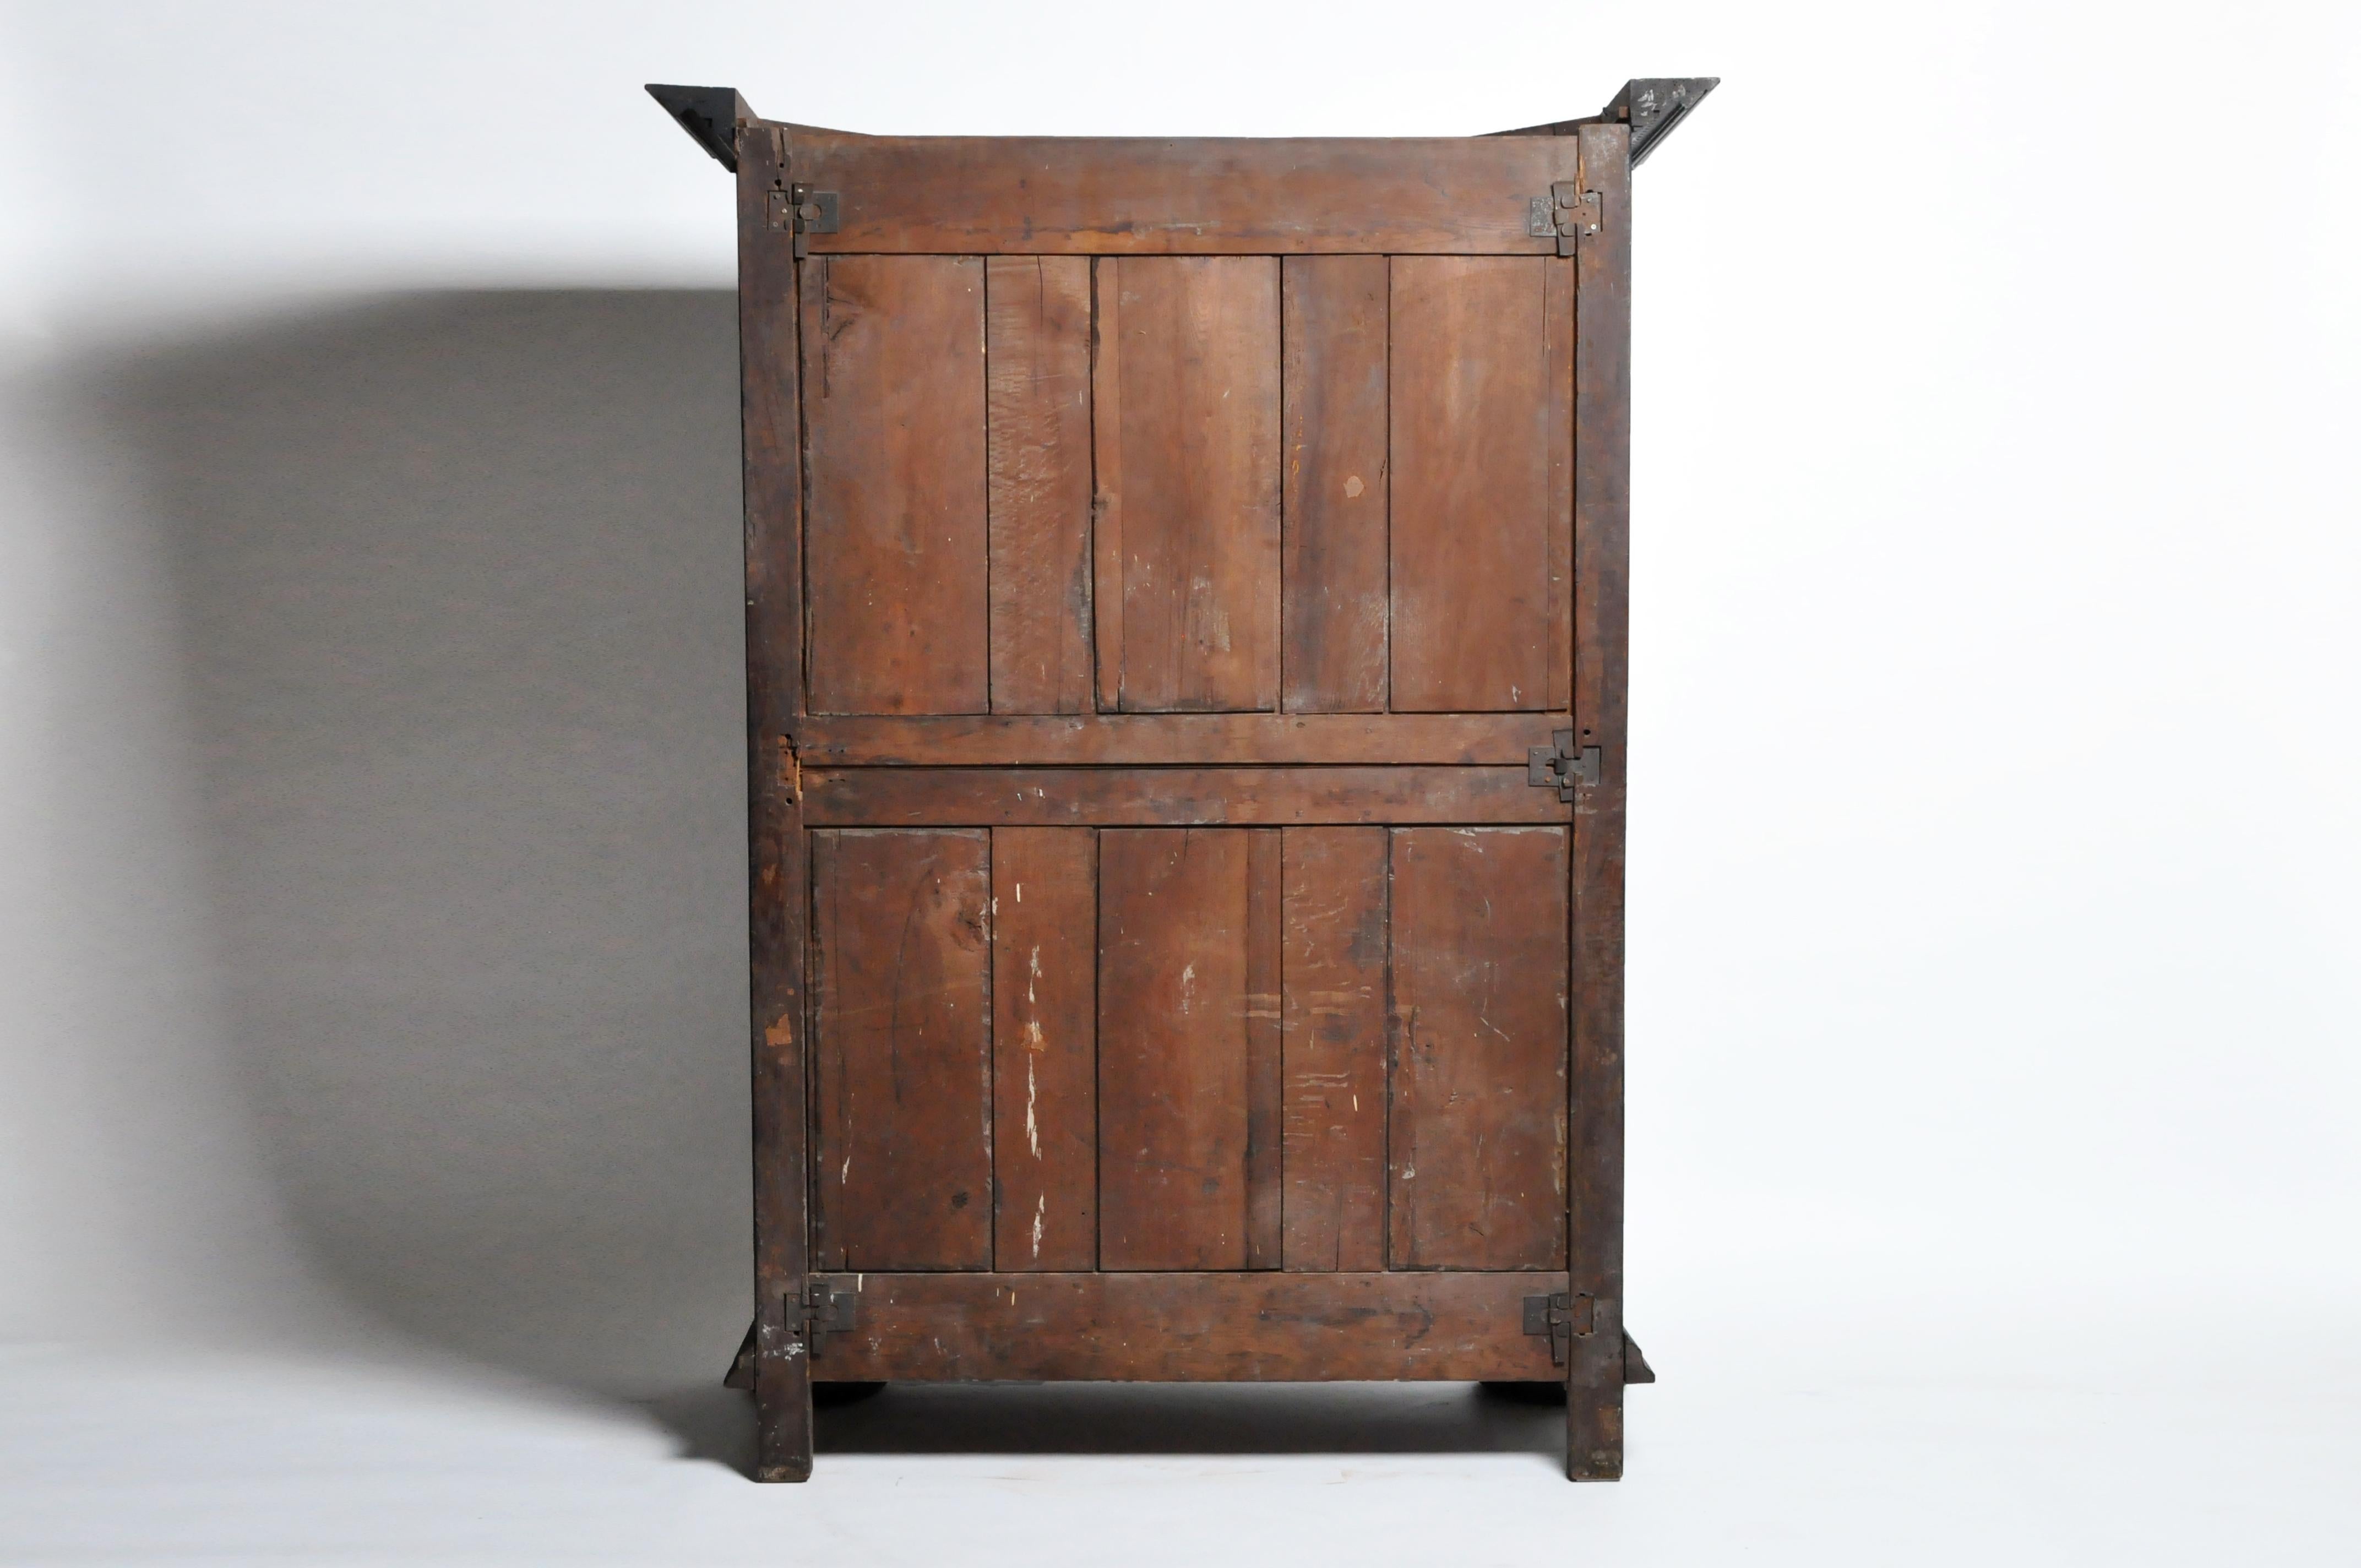 This handsome Louis XIII style armoire is from Lyons, France and was made from walnut wood, circa 18th century. The armoire's geometric style actually dates to a much earlier period but we think the piece is 18th century or early 19th. The piece